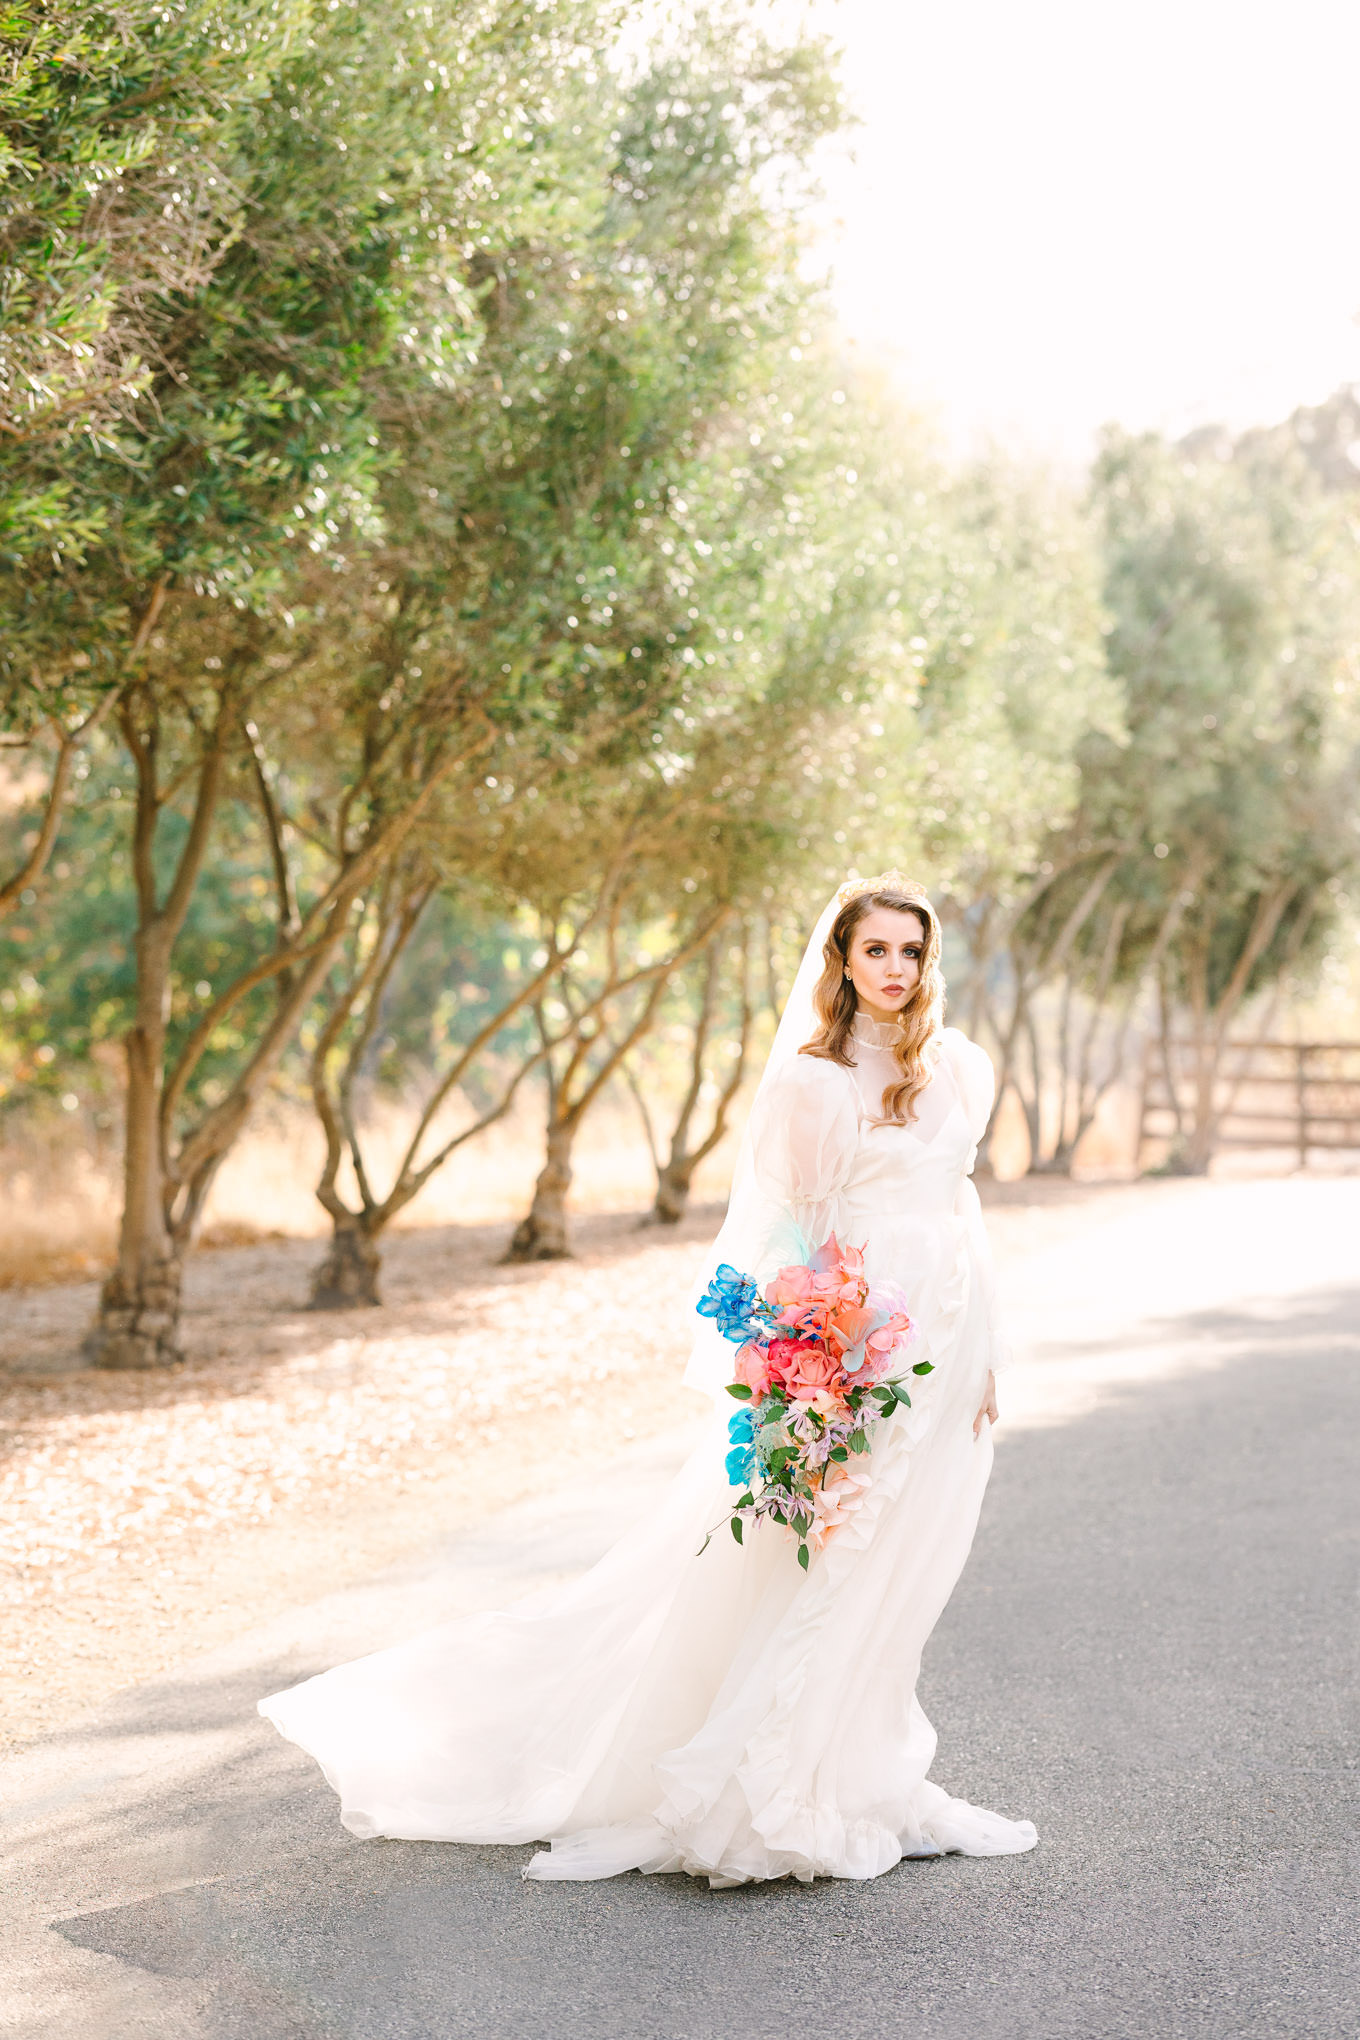 Bride Allison Harvard wearing Odylyne The Ceremony Caspian gown | Colorful and quirky wedding at Higuera Ranch in San Luis Obispo | #sanluisobispowedding #californiawedding #higueraranch #madonnainn   Source: Mary Costa Photography | Los Angeles